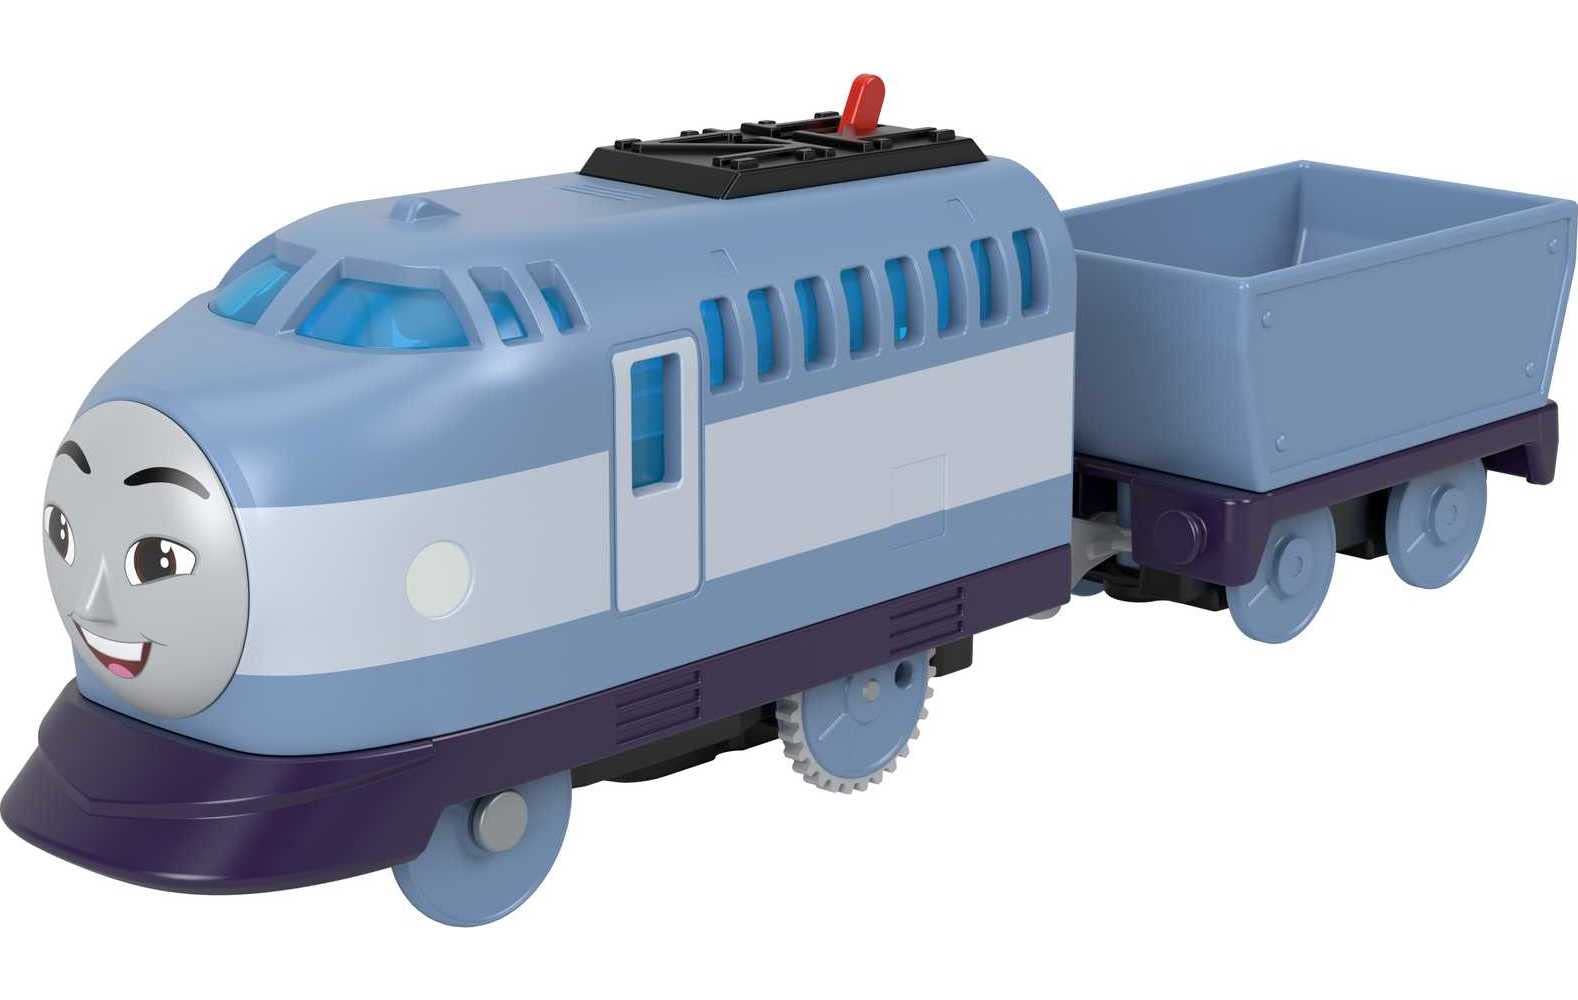 Thomas & Friends Fisher-Price Thomas & Friends Kenji Motorized Engine, Battery-Powered Toy Train for Preschool Kids Ages 3 Years and Older